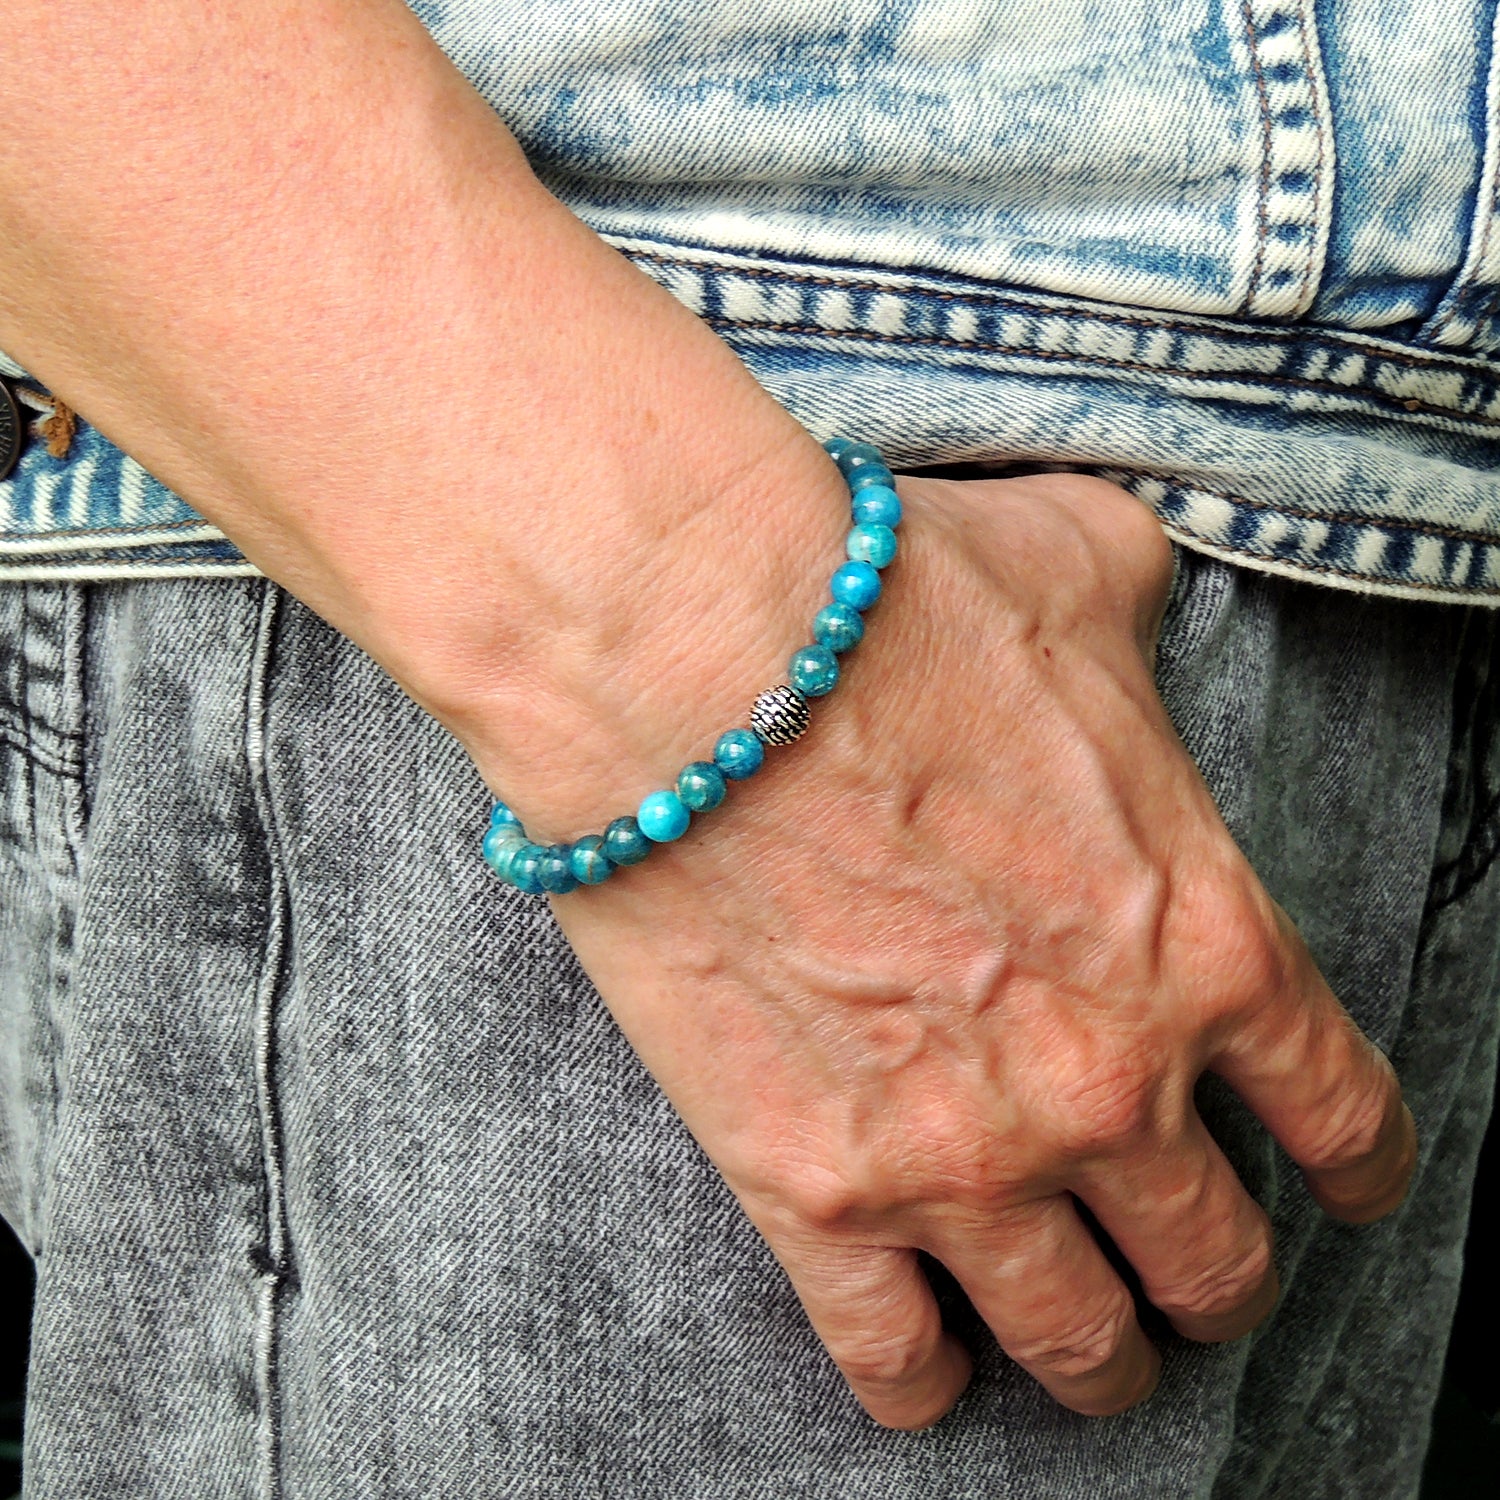 Healing Blue Apatite for Throat Chakra Activation | Modern Handmade Stretch Bracelet with 925 Silver Stone Patterned Bead | Manifestation Stones | Essential Gemstone for Growth and Confidence